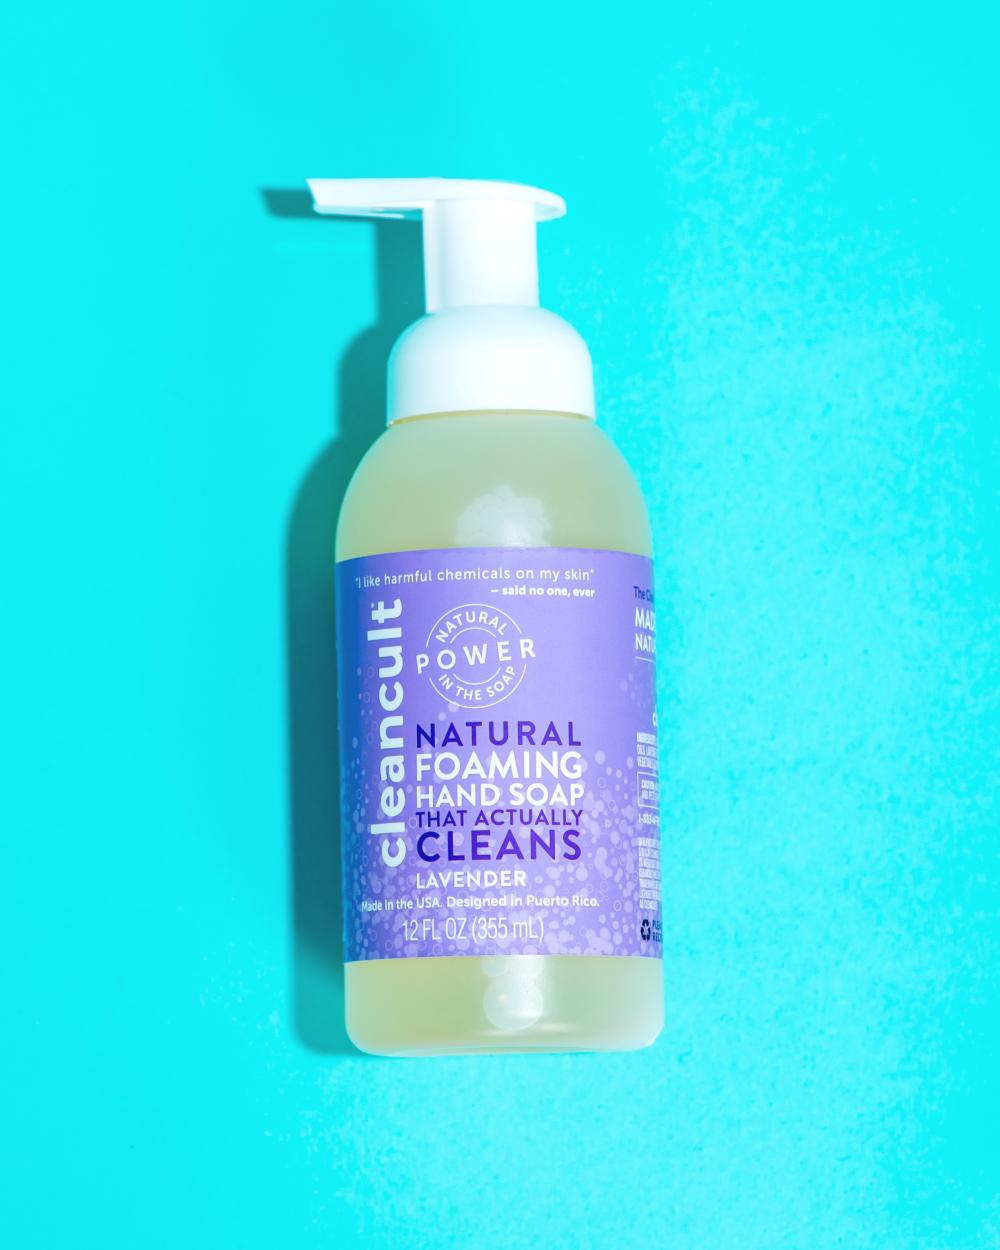 Natural Foaming Hand Soap | cleancult